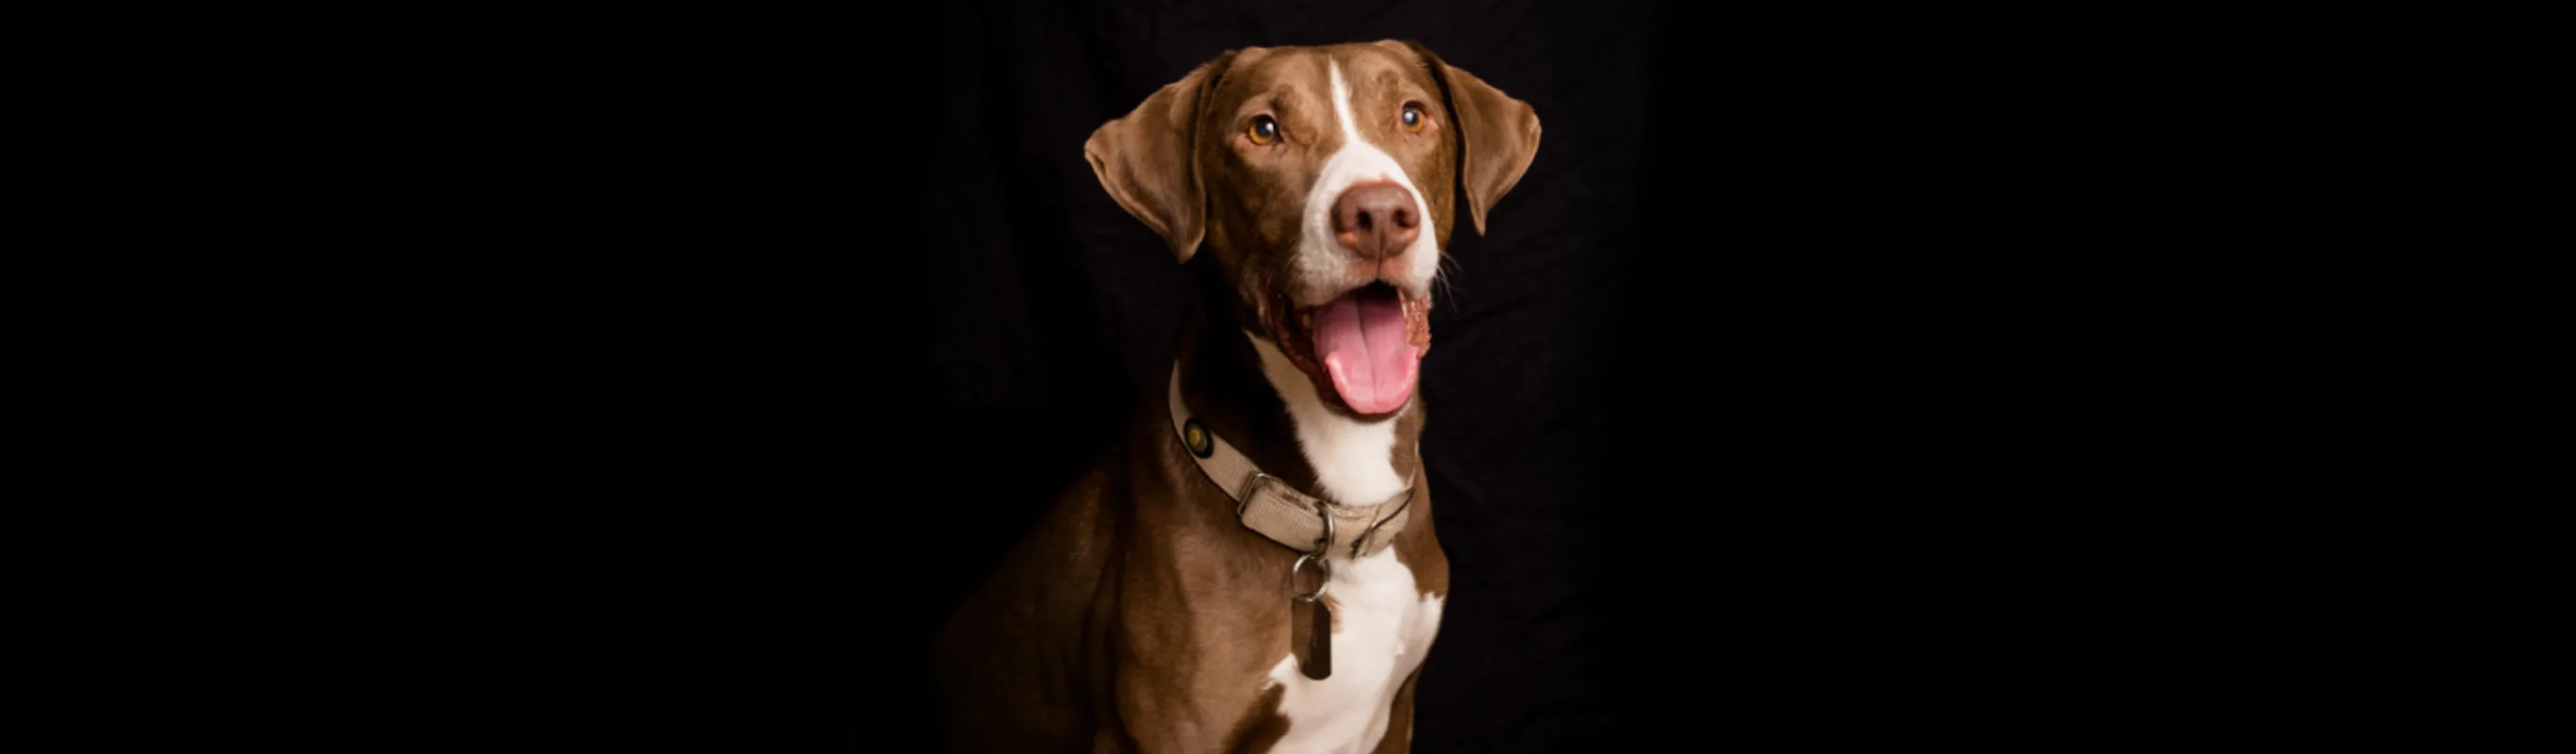 A photo of a brown and white dog panting and looking at the camera